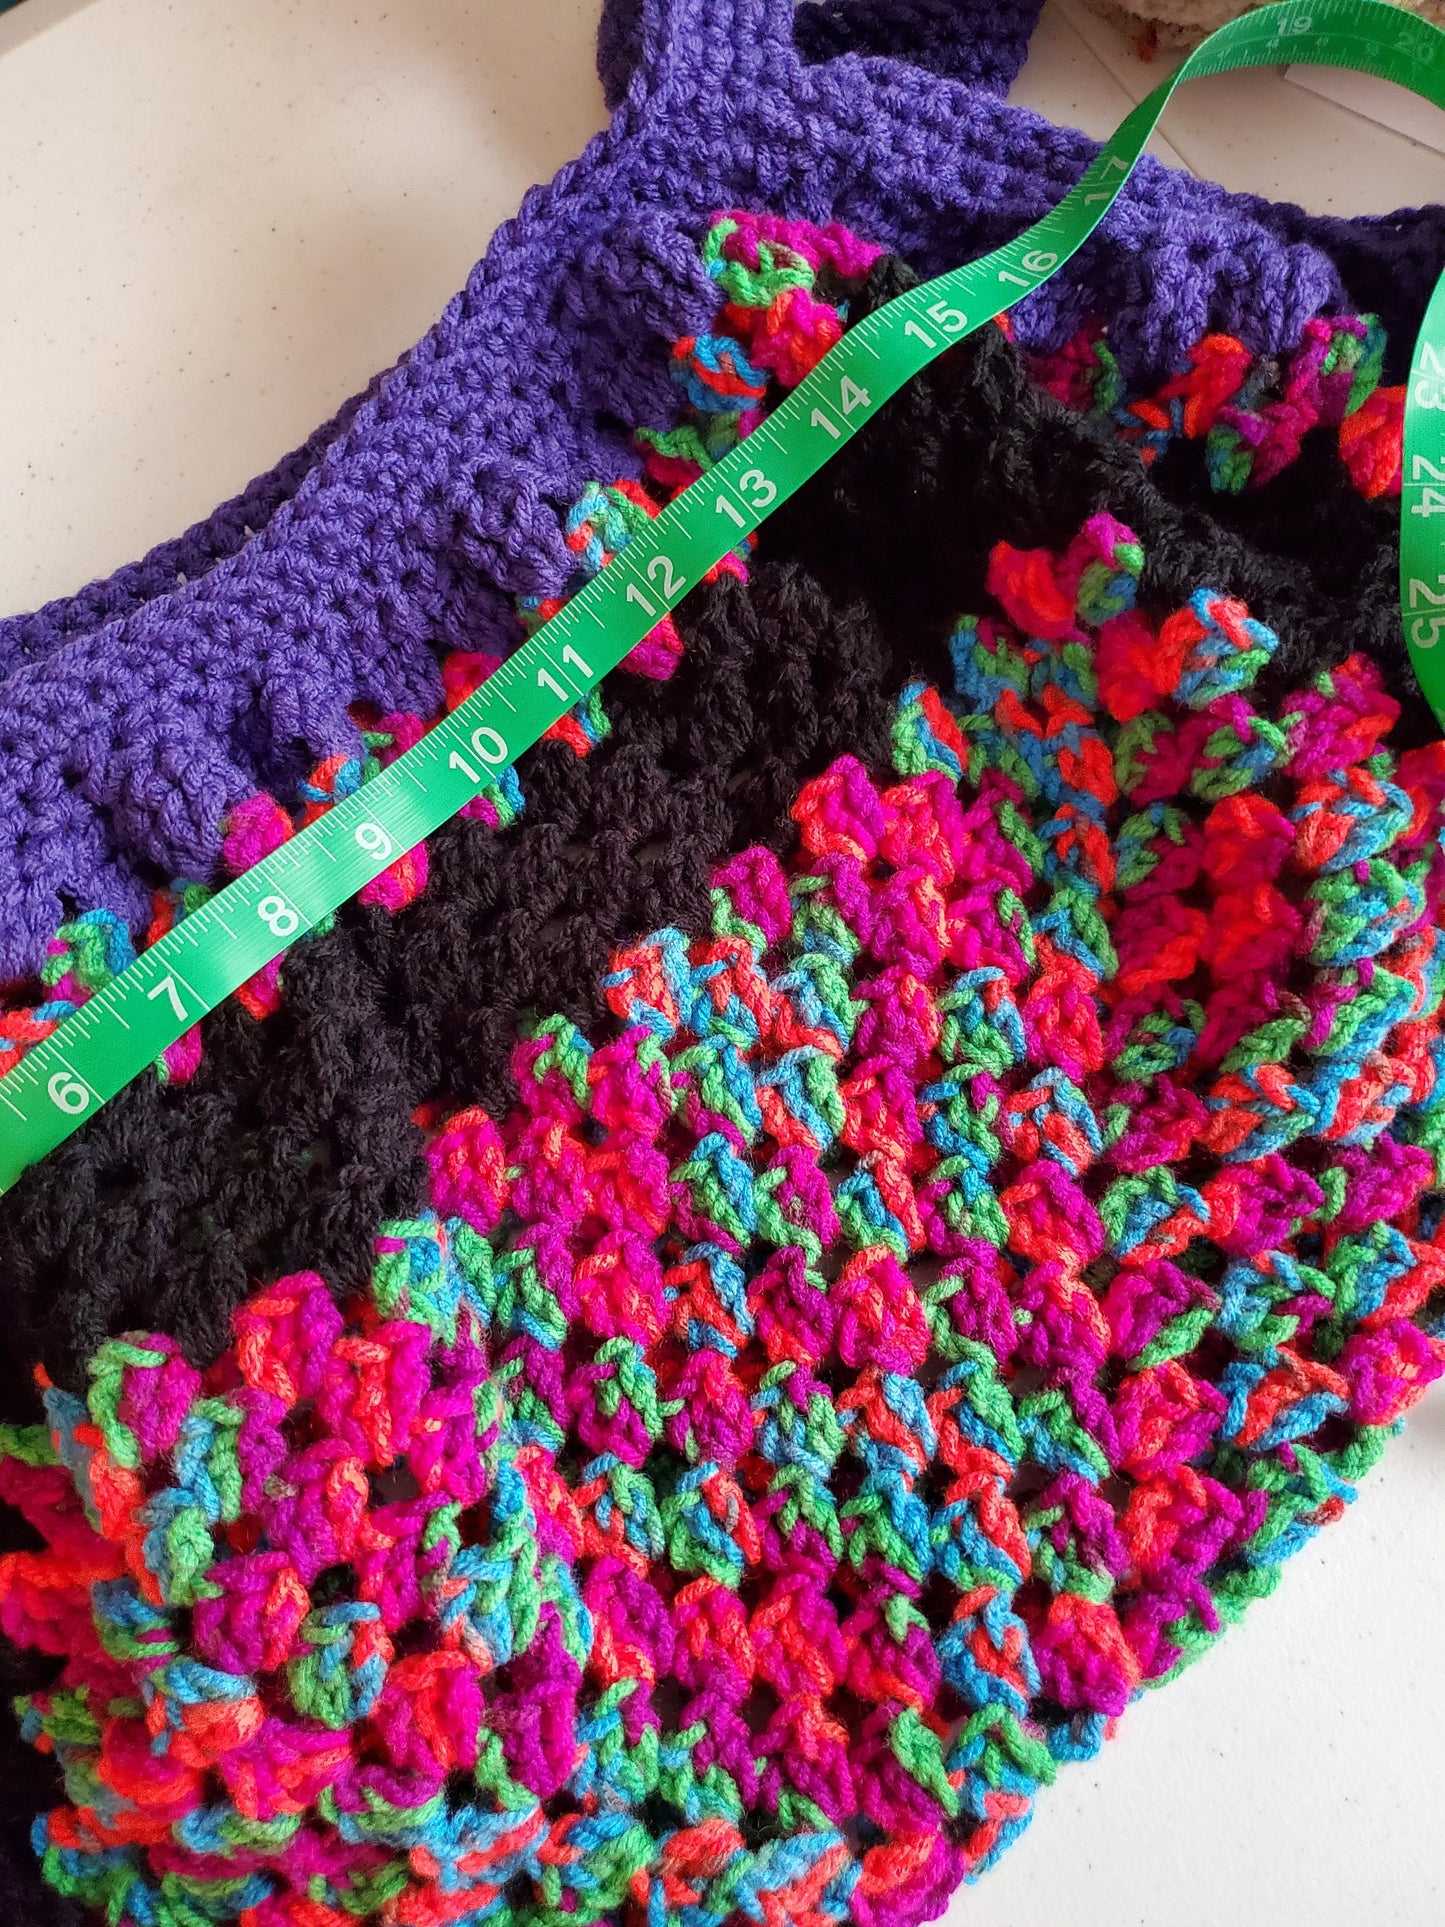 Market Bag / Crocheted Bag / Neon with Black and Purple